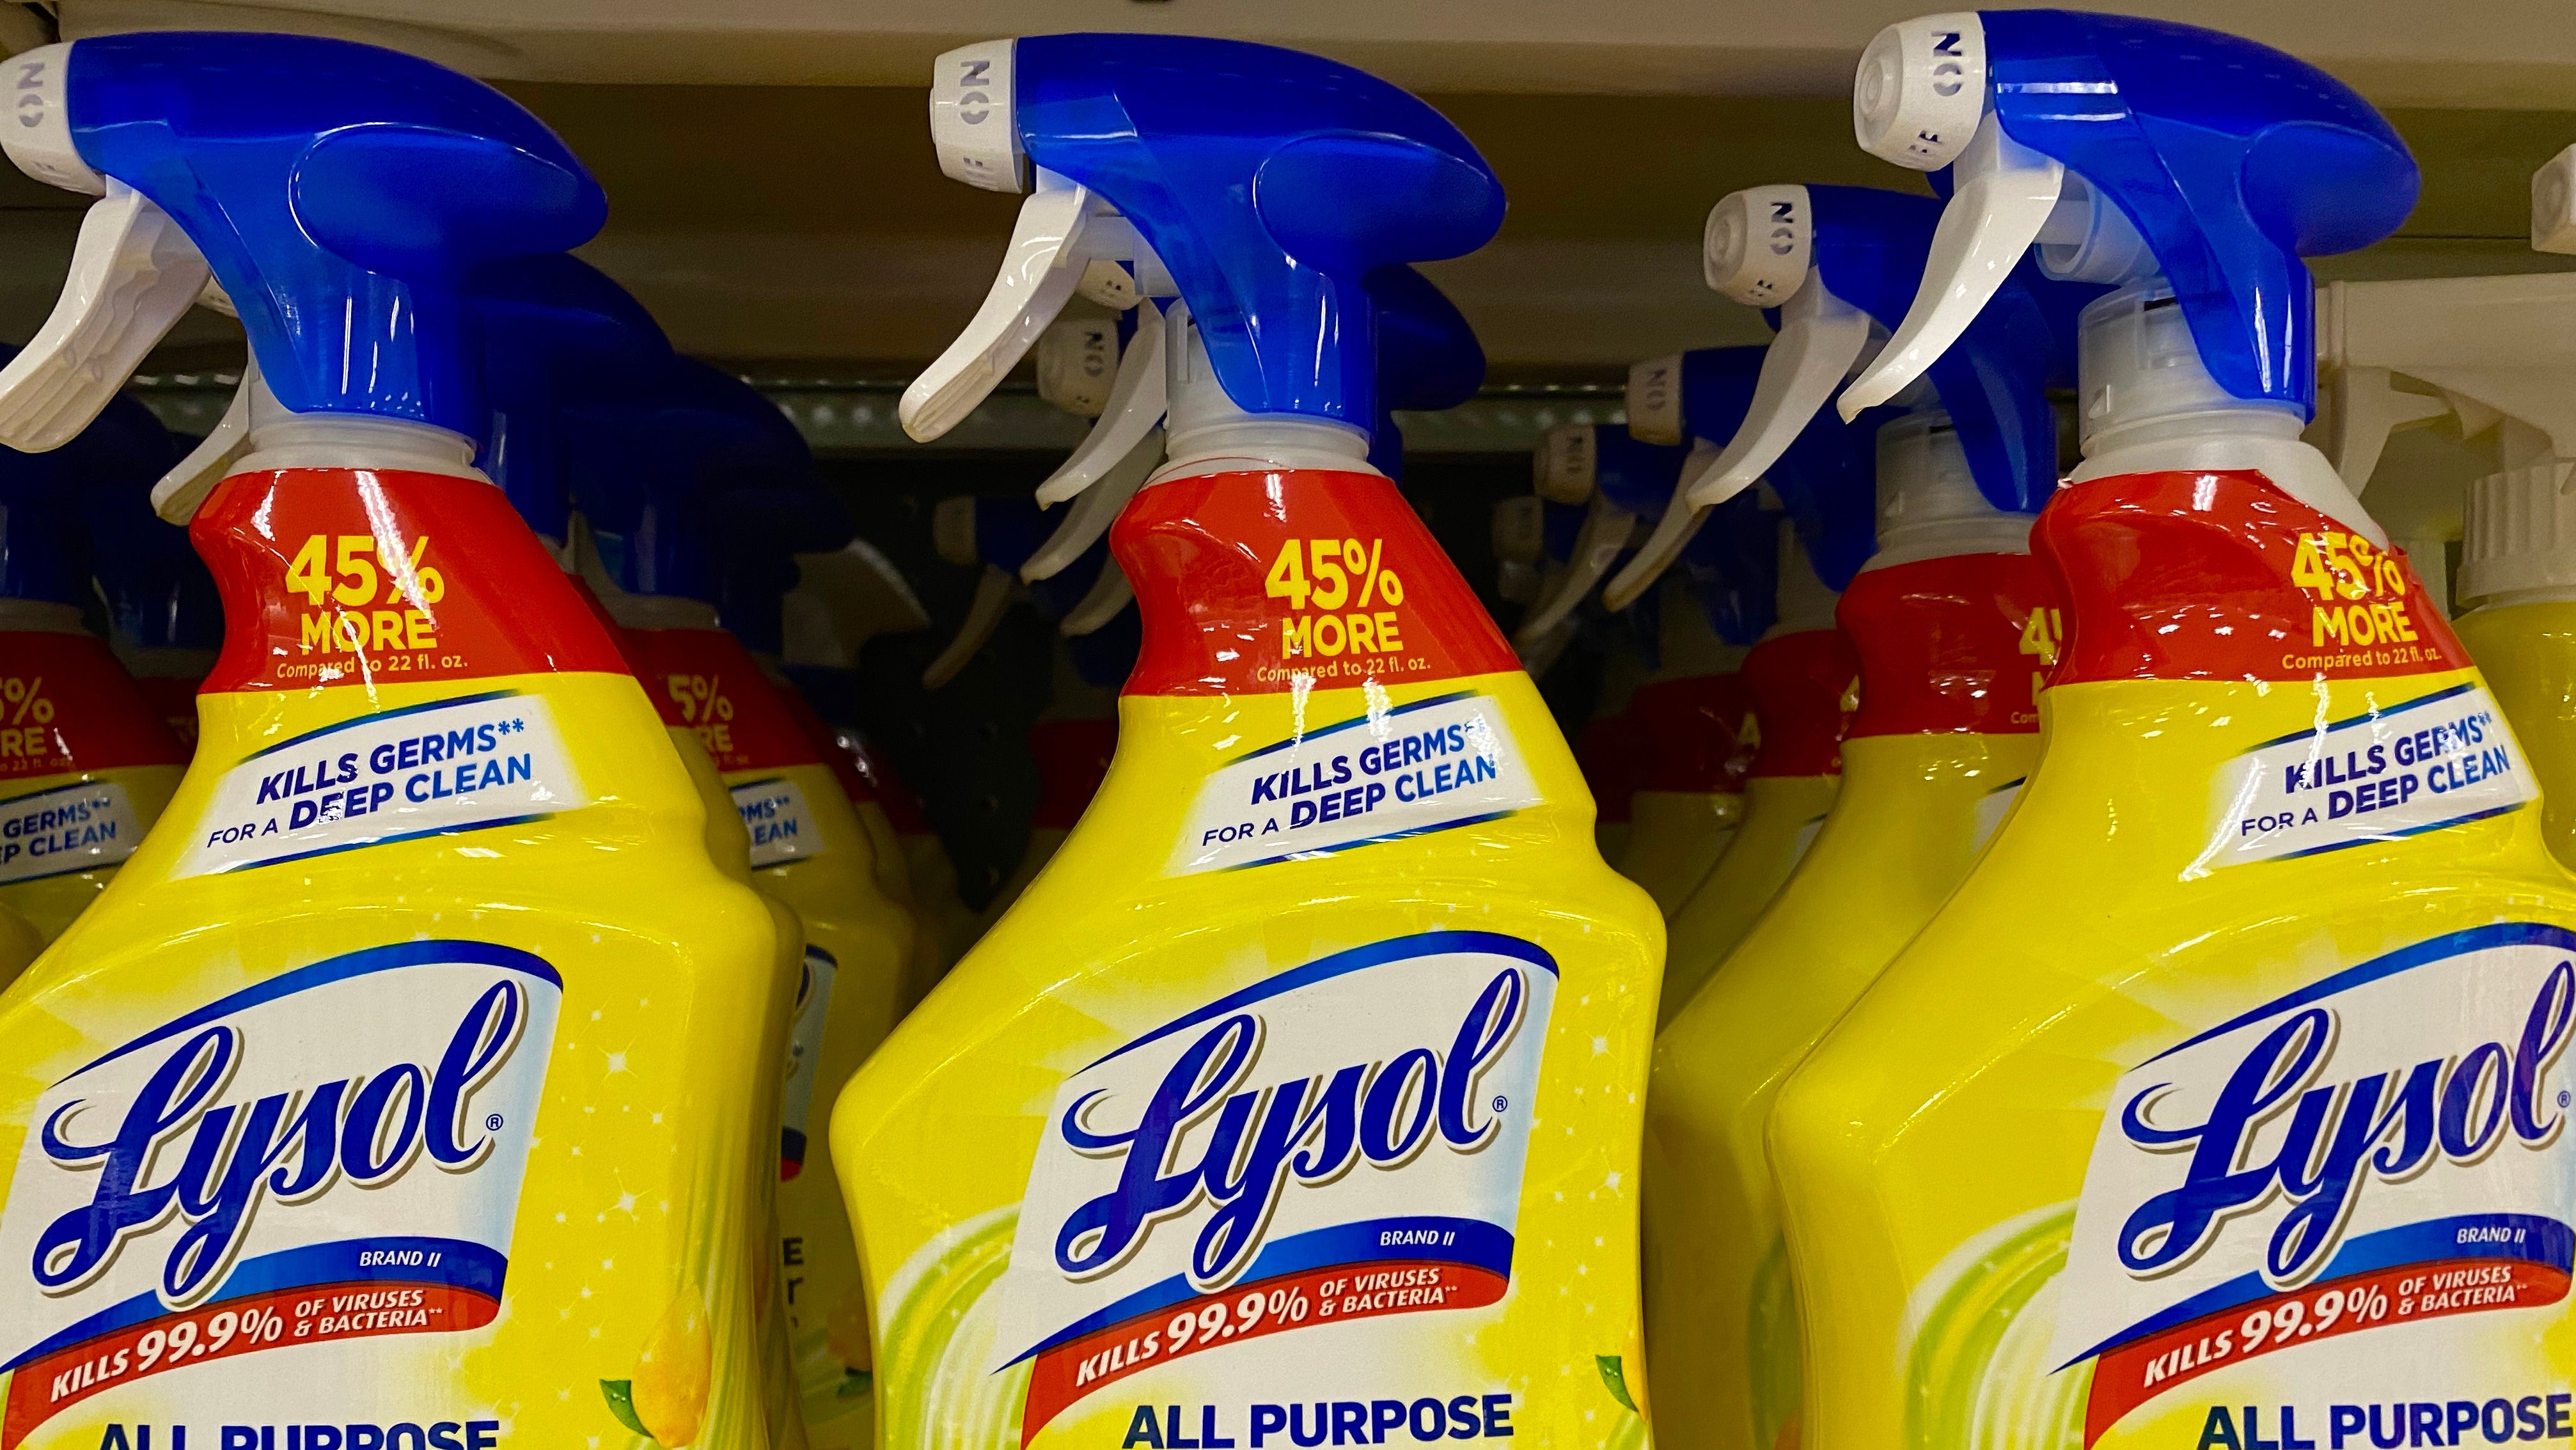 How Did Lysol ‘Know’ About The Coronavirus Before It Happened?